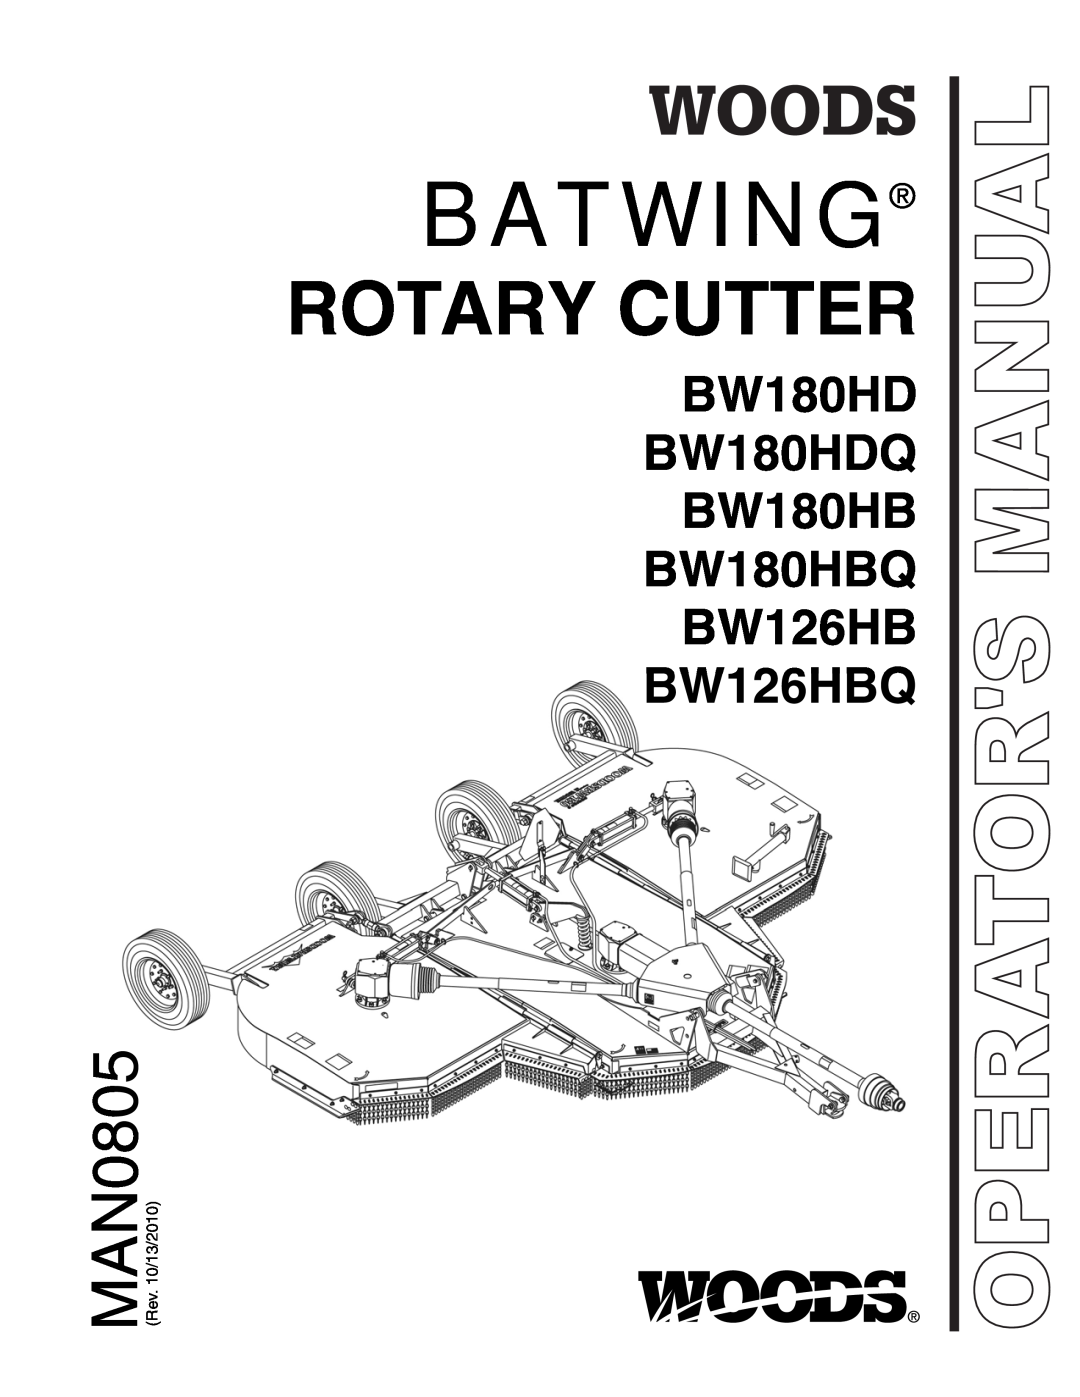 Woods Equipment manual Batwing, Rotary Cutter, BW180HD BW180HDQ BW180HB BW180HBQ BW126HB, BW126HBQ, Operators Manual 